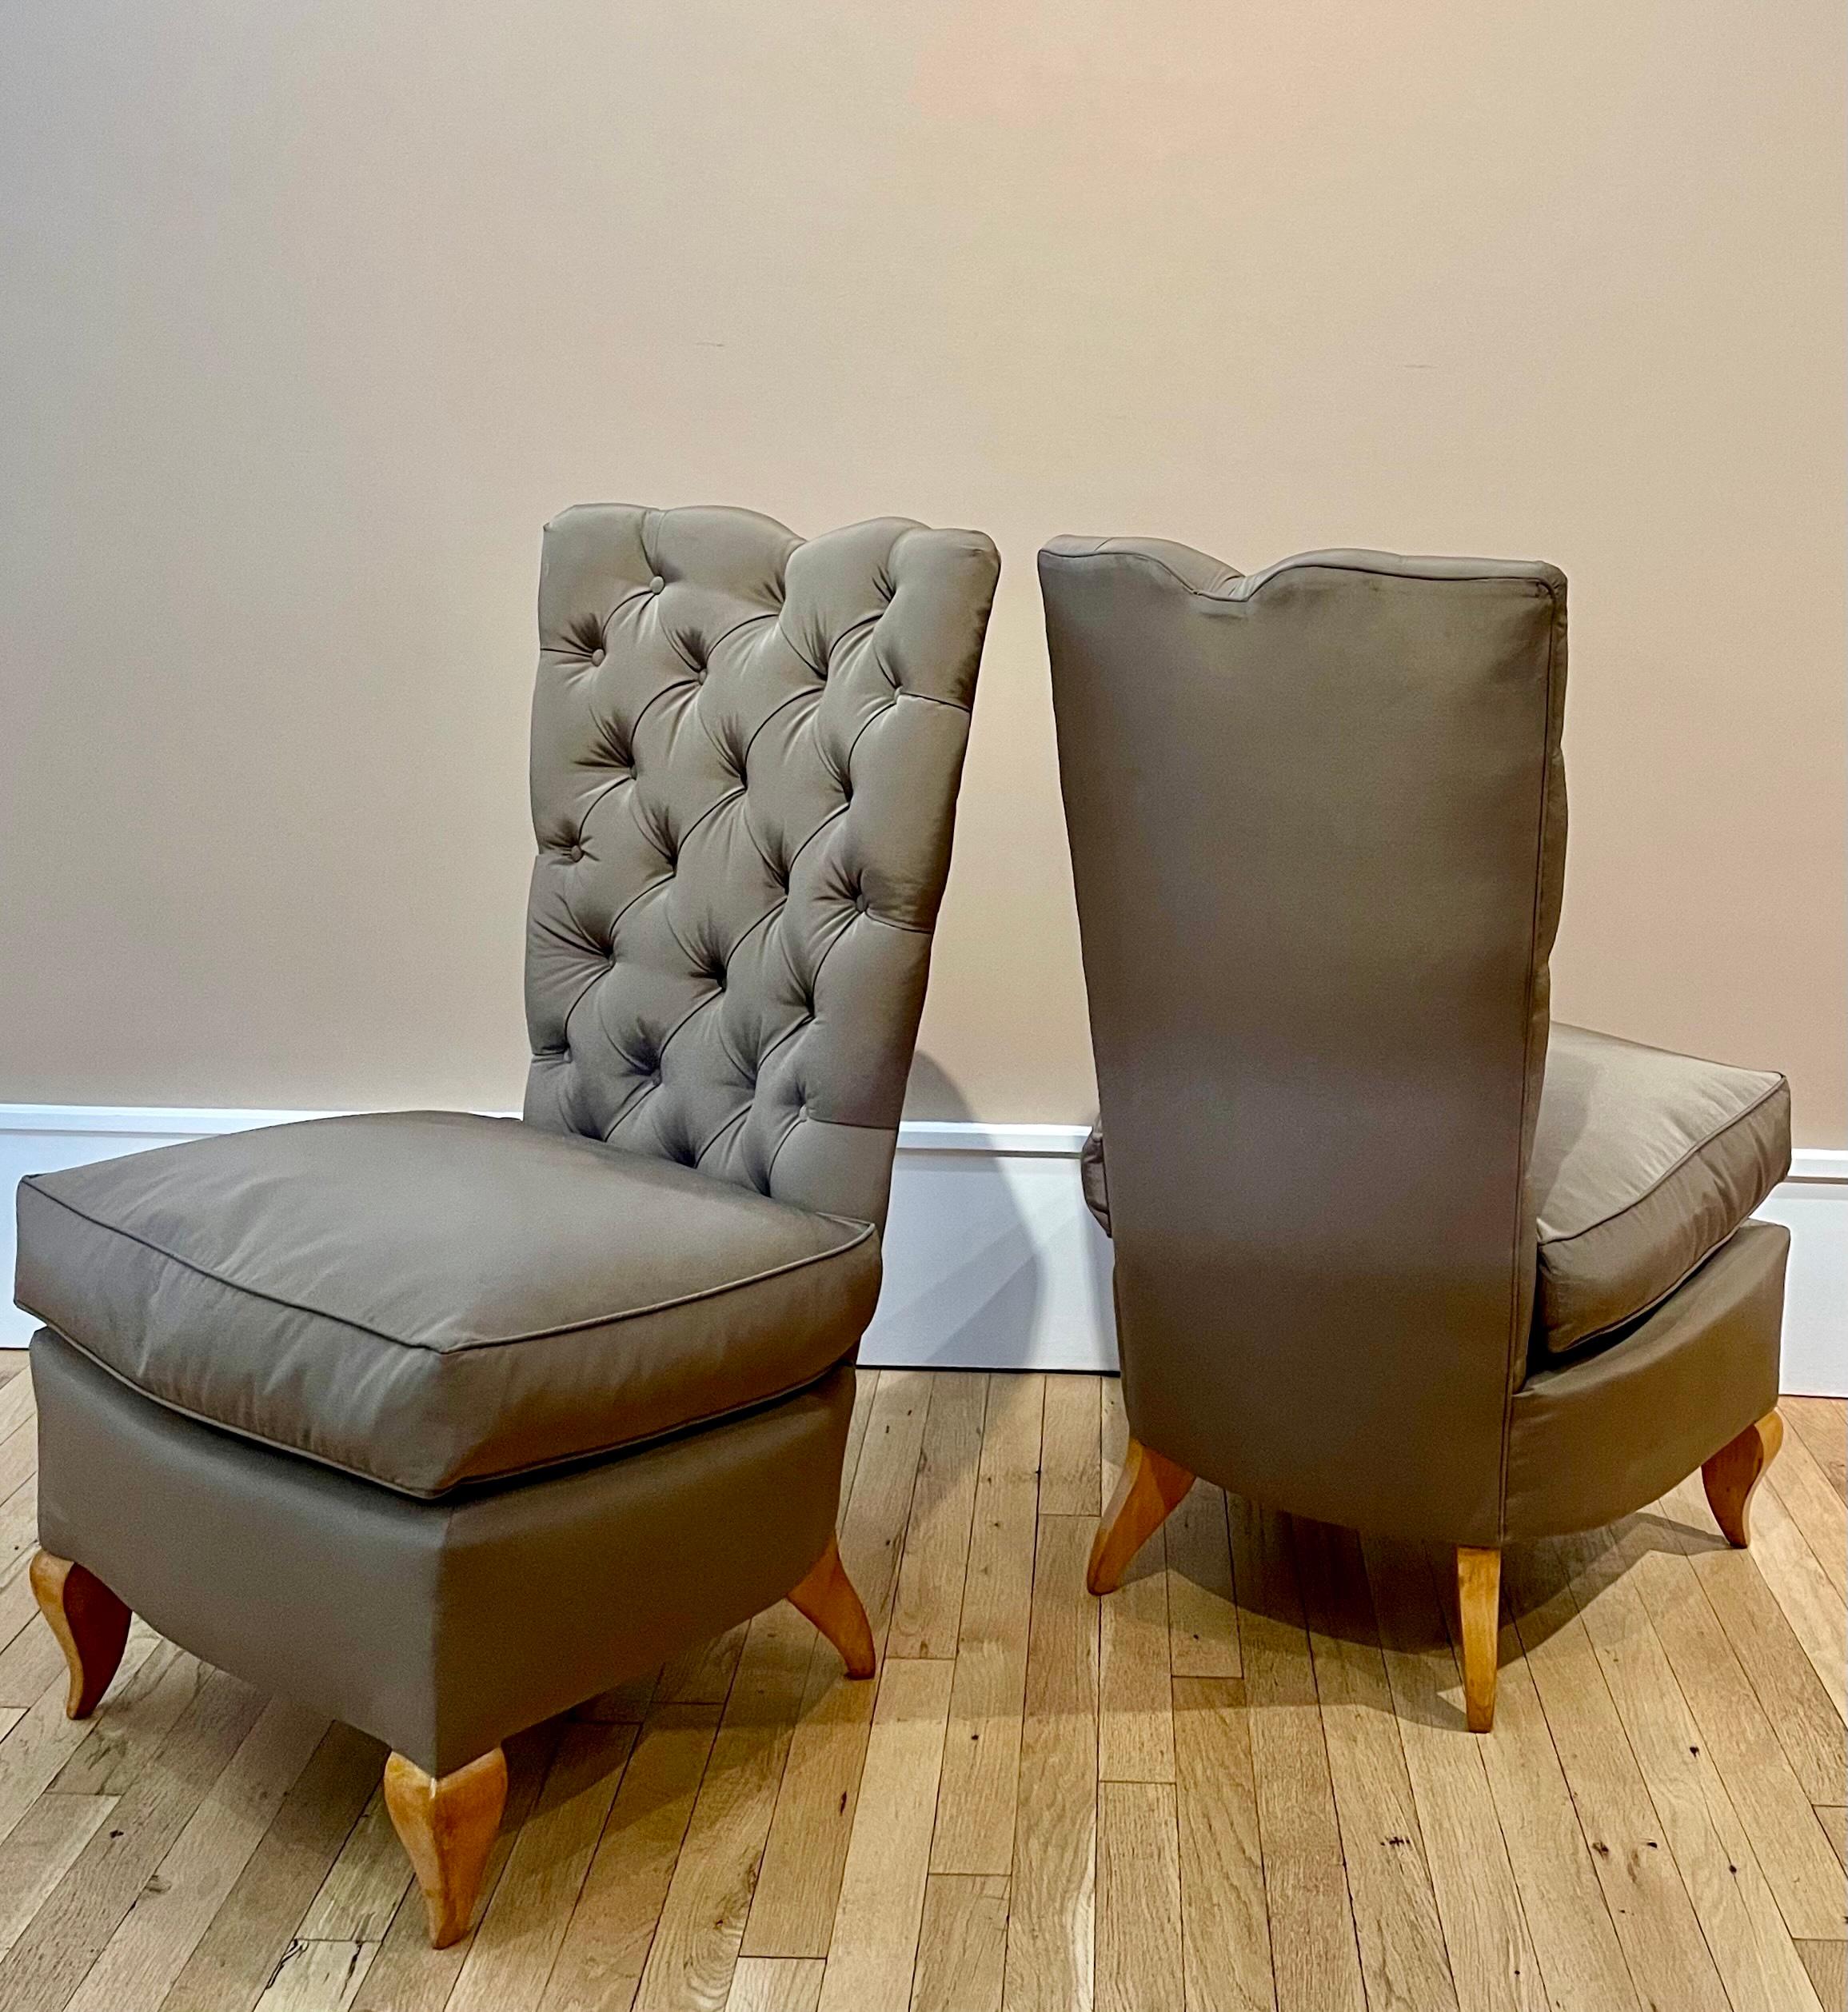 These earthbound chairs appear to be weightless. Such is the illusion that the designer René Prou was able to create in 1930s Paris with the aid of a highly-skilled upholsterer. Before going out on his own in 1920, Prou had worked for two decorating